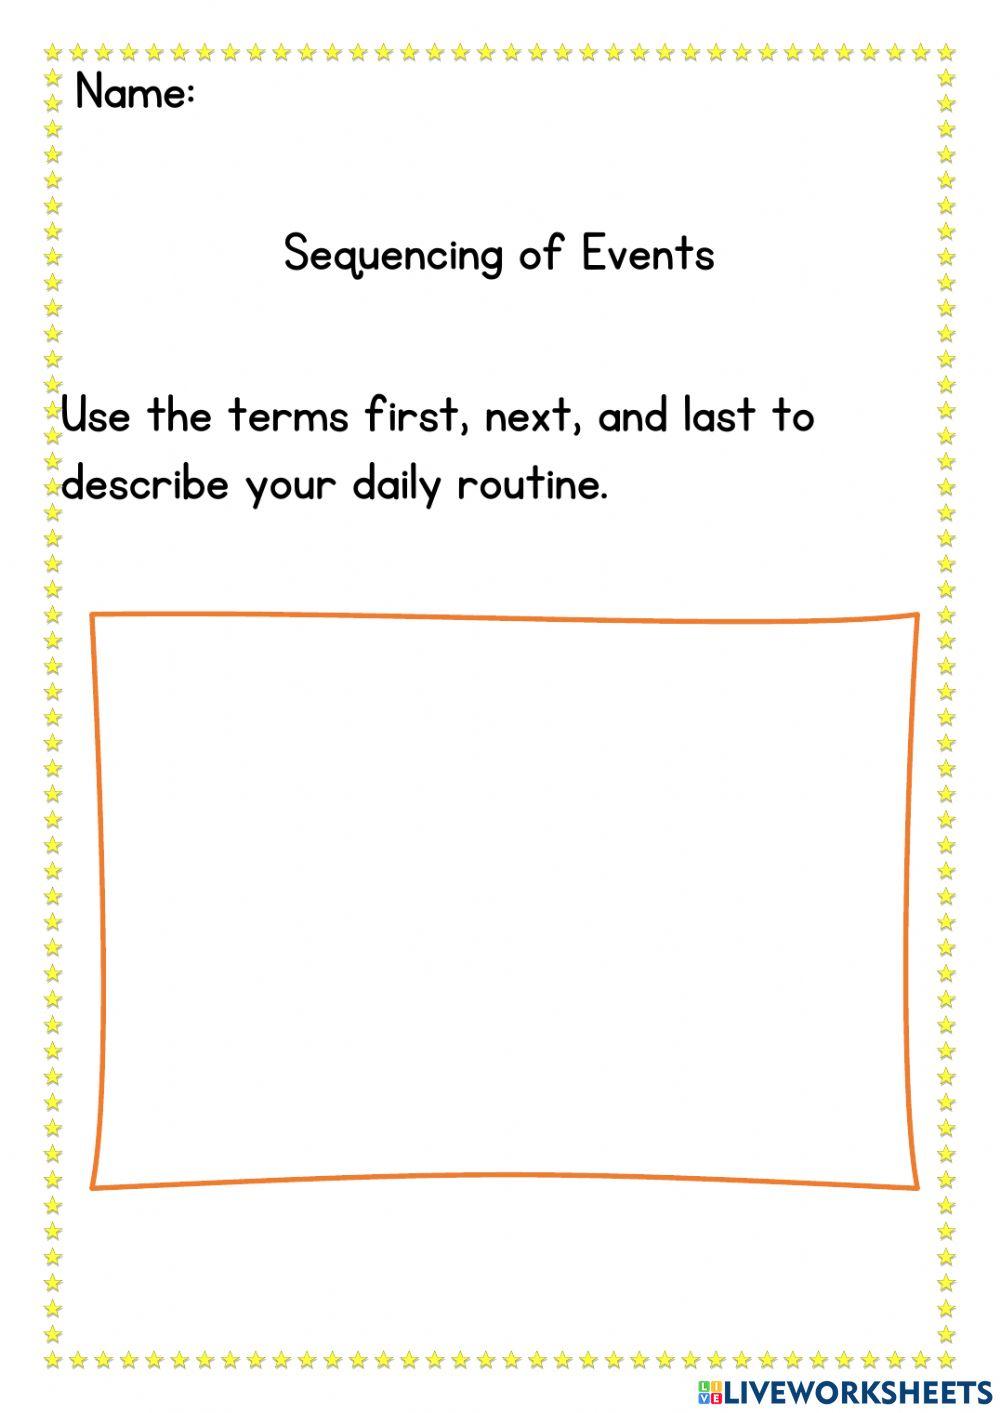 Sequencing of Events Practice